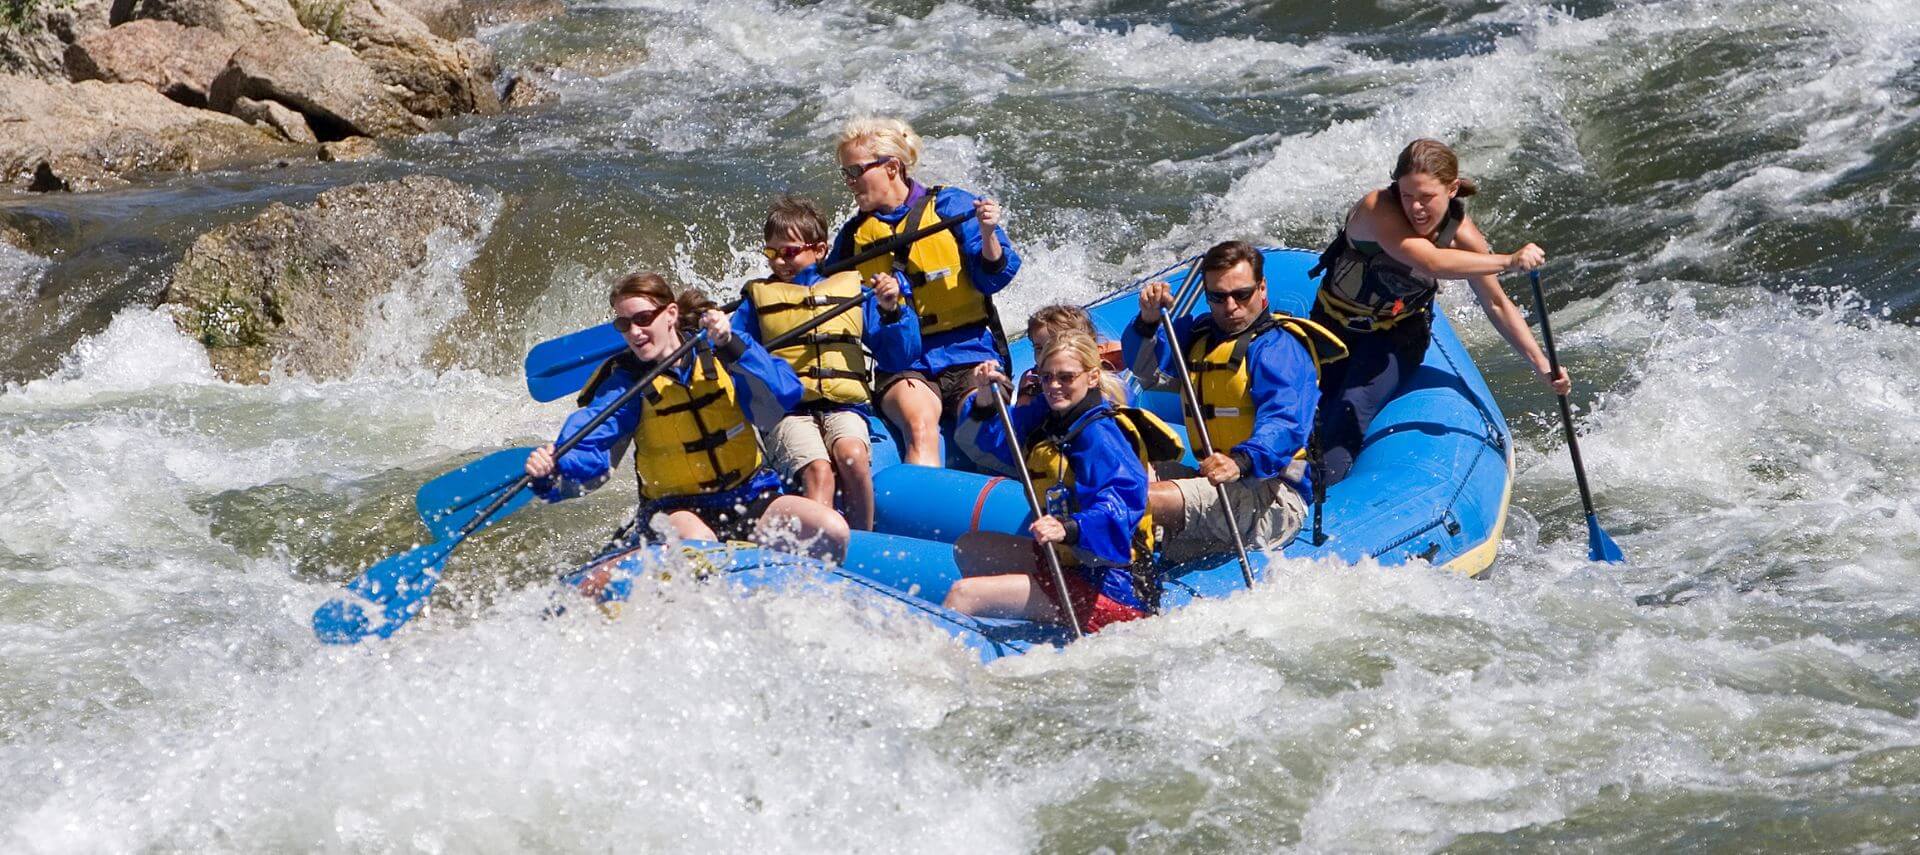 A group of people in blue vests on a blue raft rafting on a wild river.